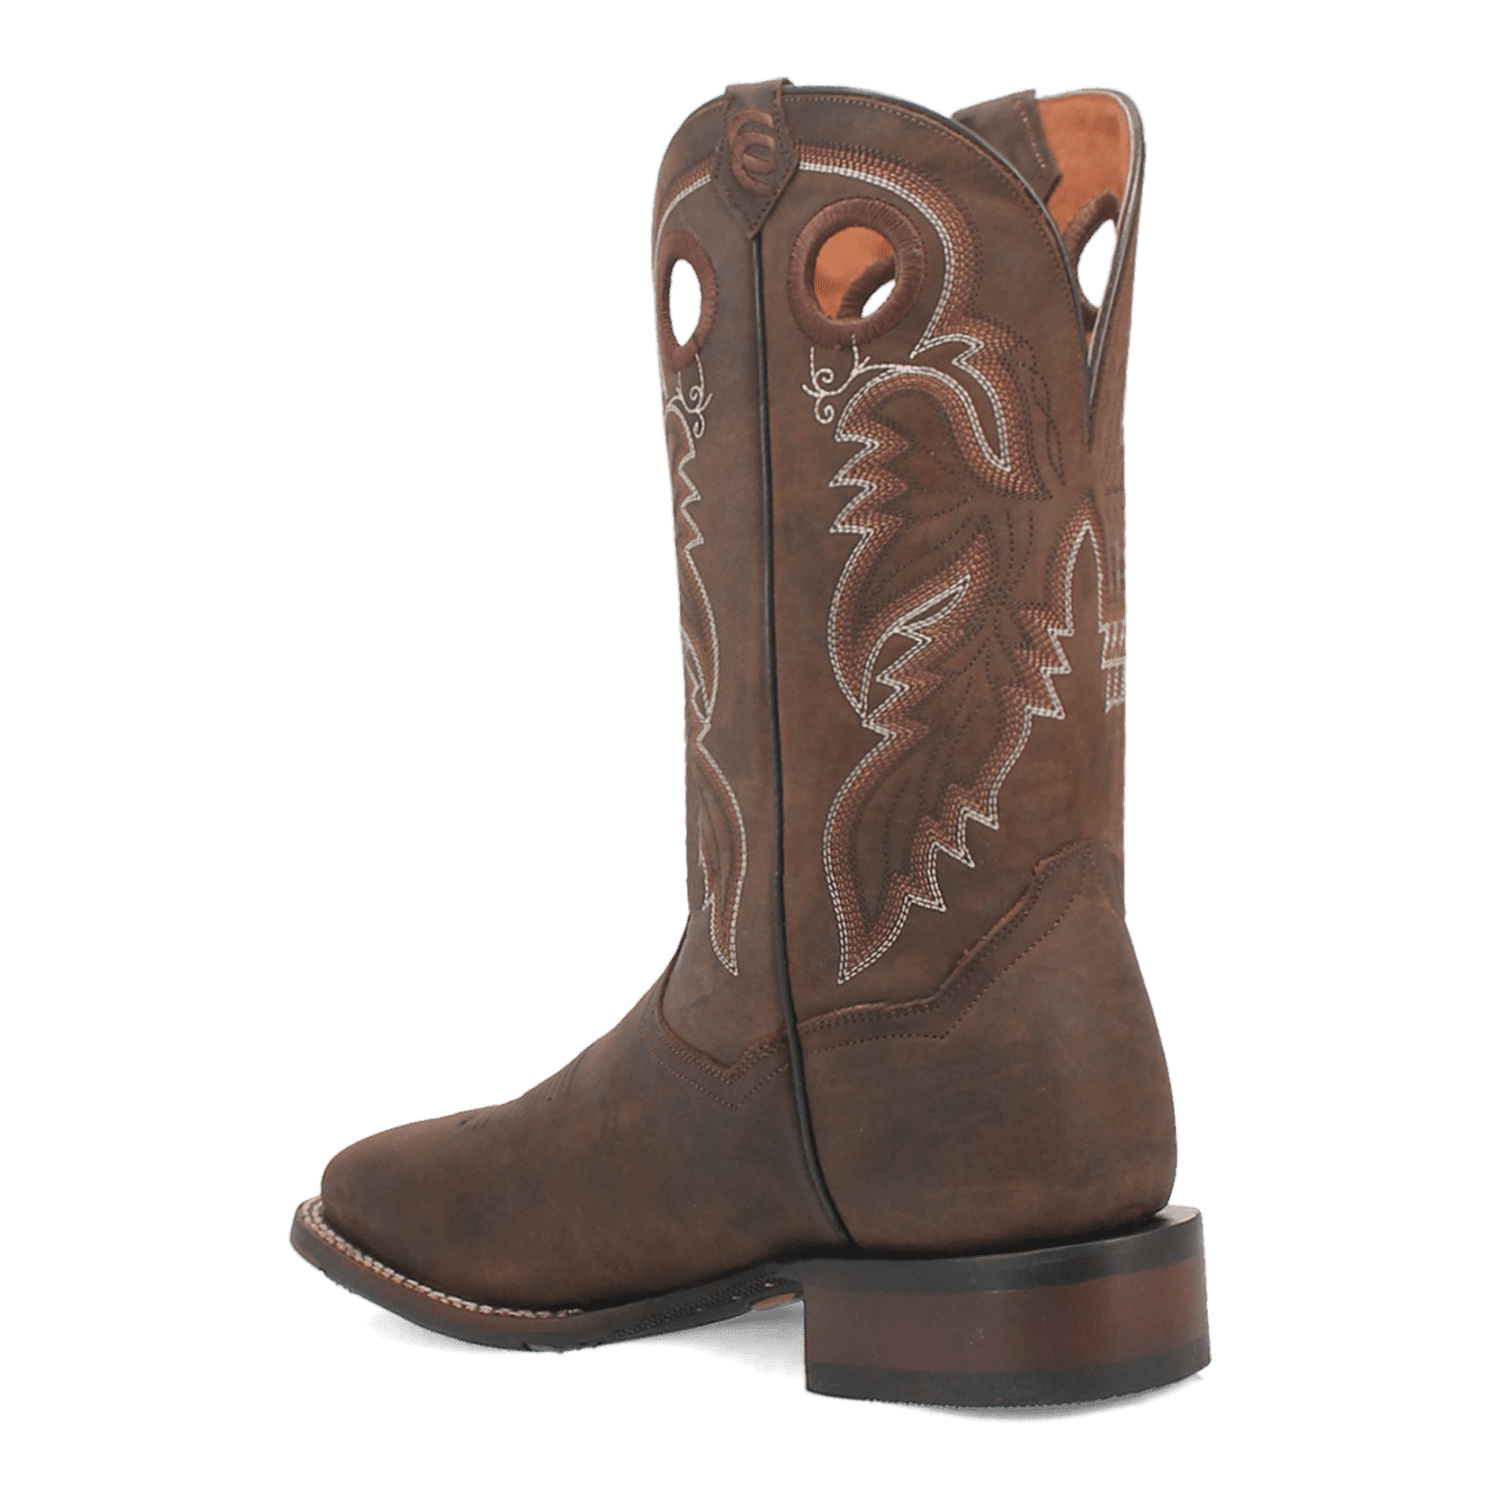 ABRAM LEATHER BOOT Image